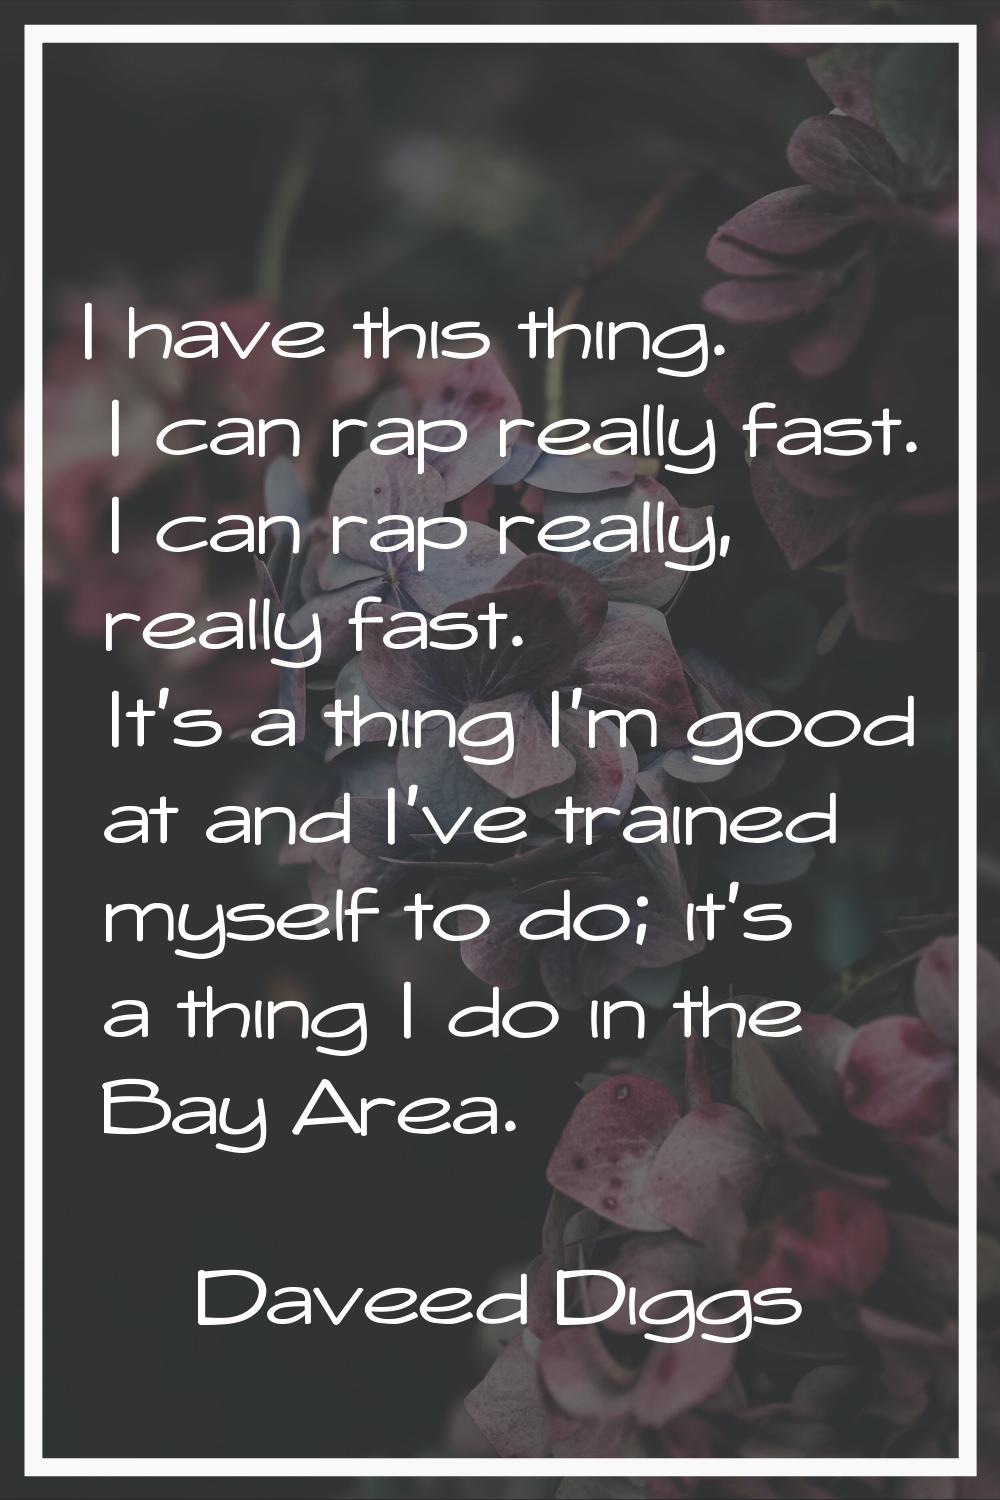 I have this thing. I can rap really fast. I can rap really, really fast. It's a thing I'm good at a